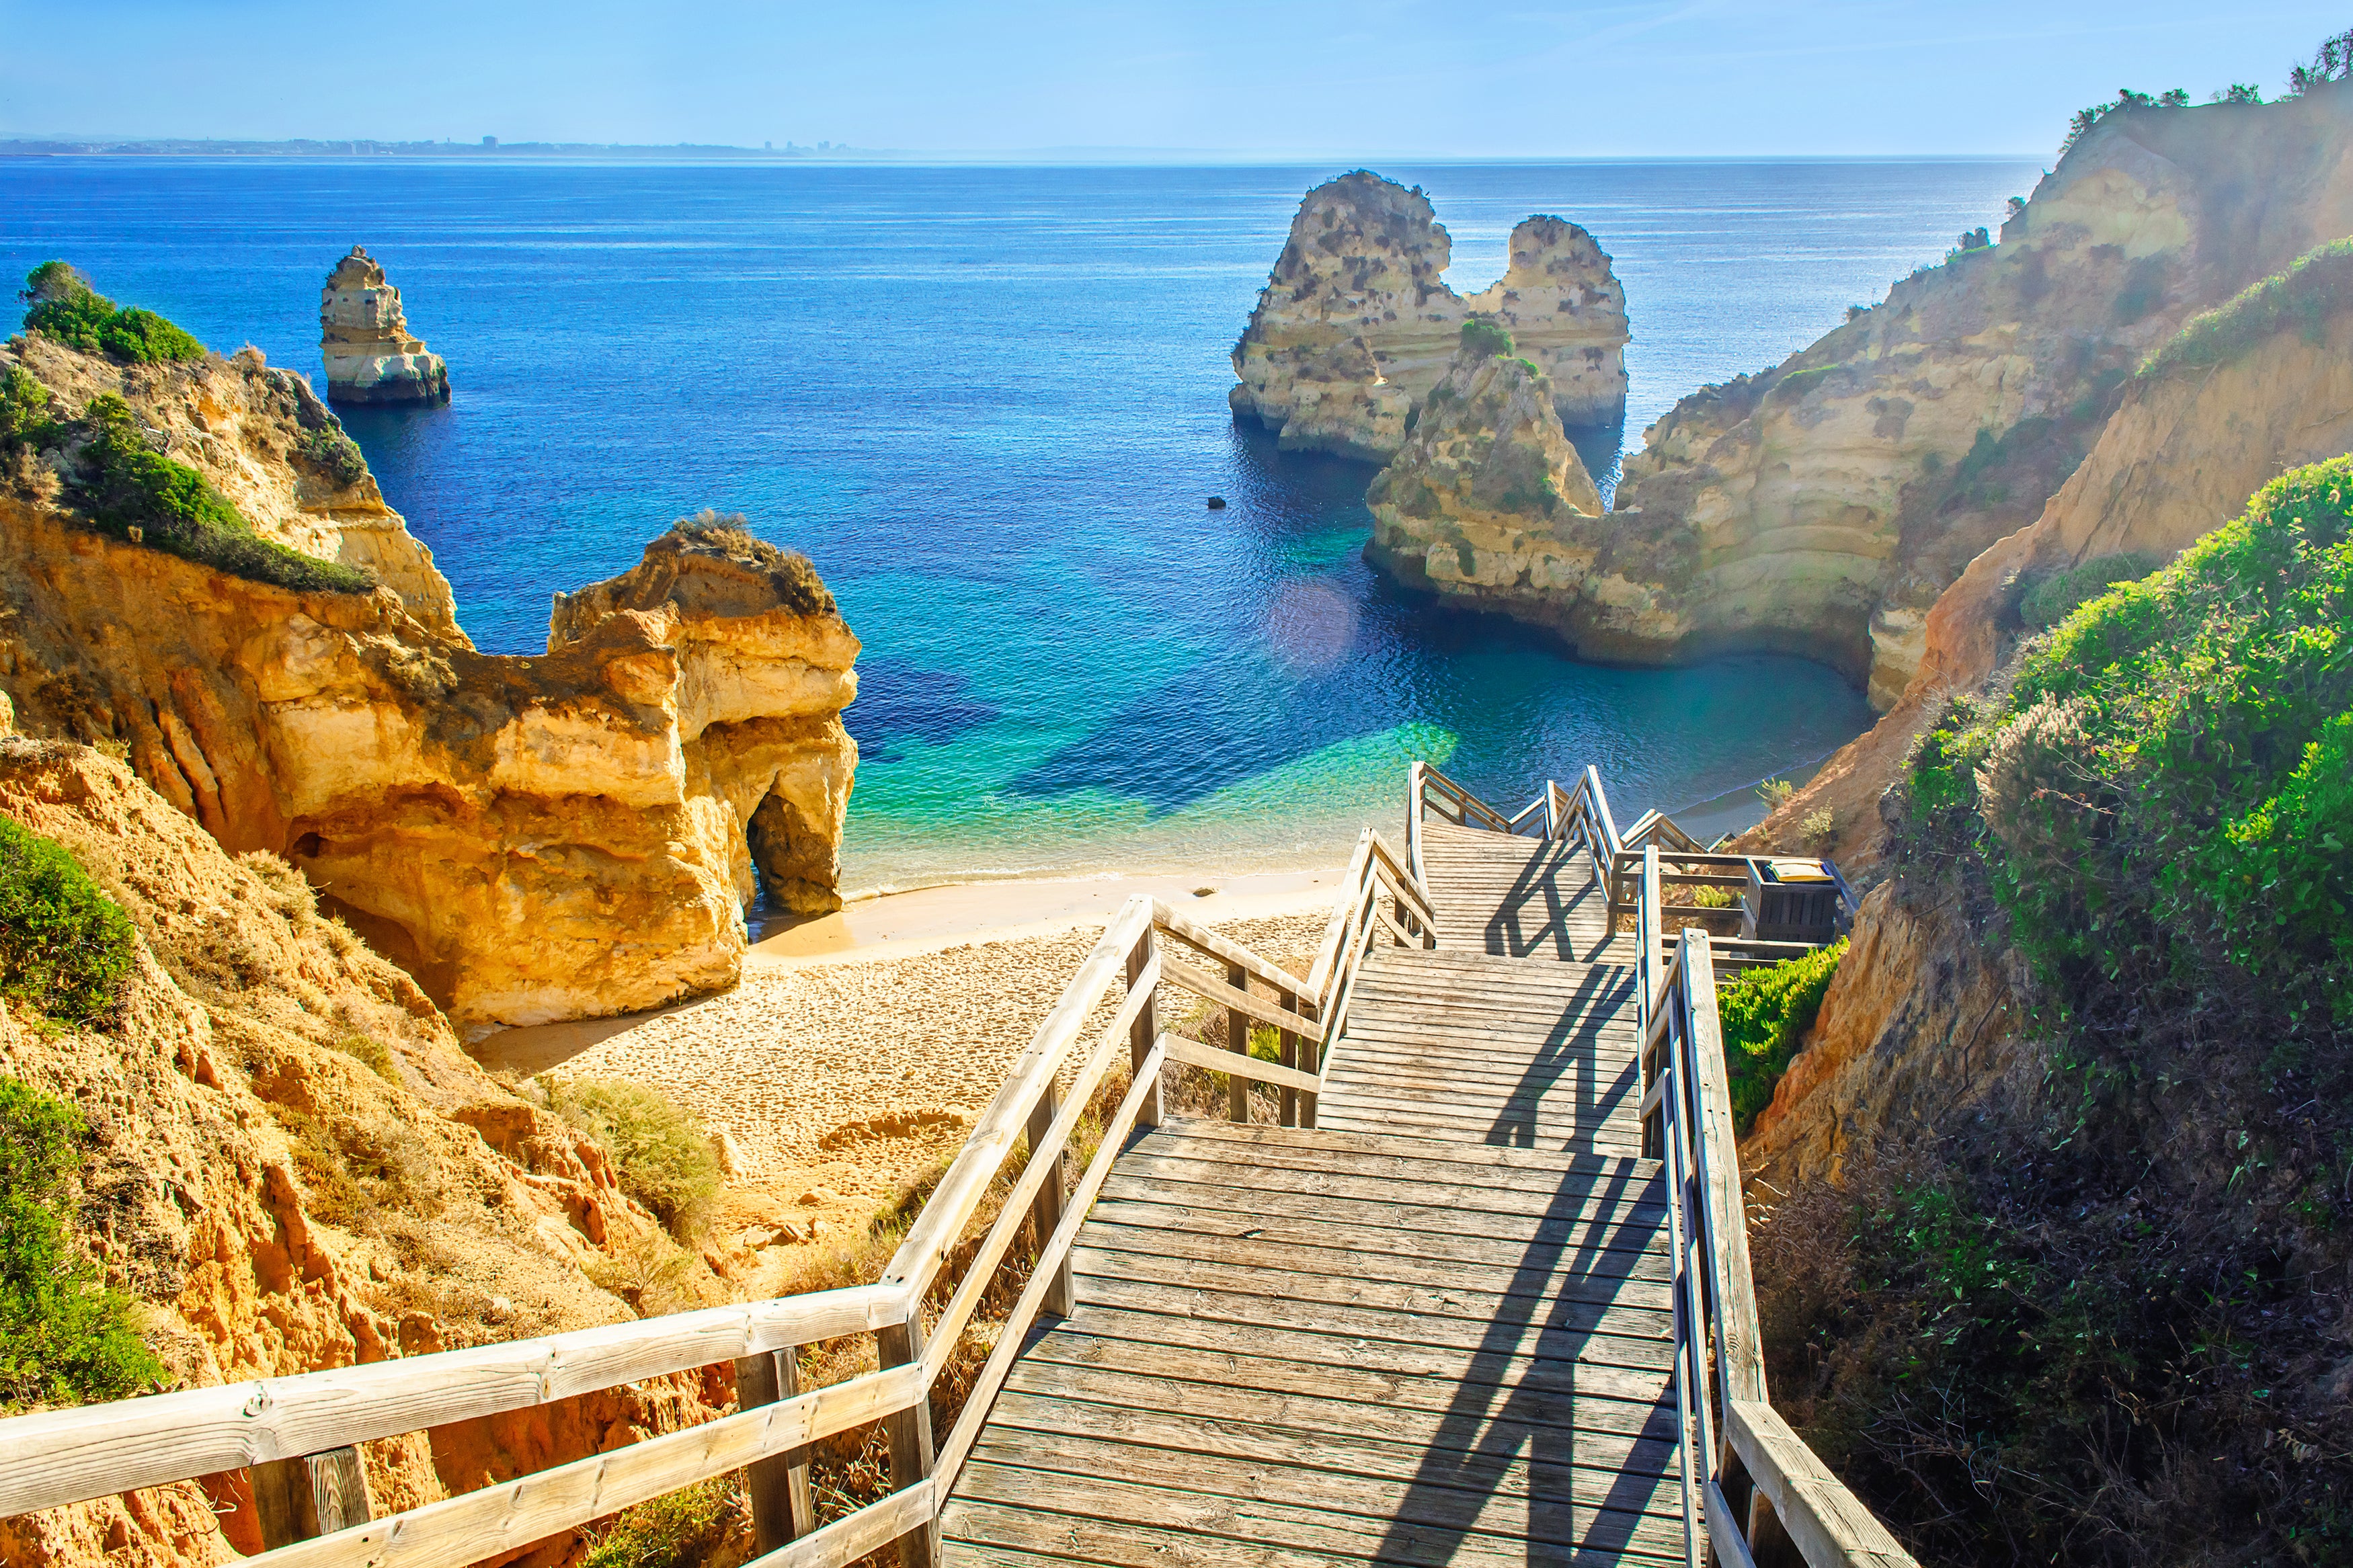 A wooden footbridge leads to the beach at Praia do Camilo in Portugal’s Algarve region, on the UK’s ‘green list’